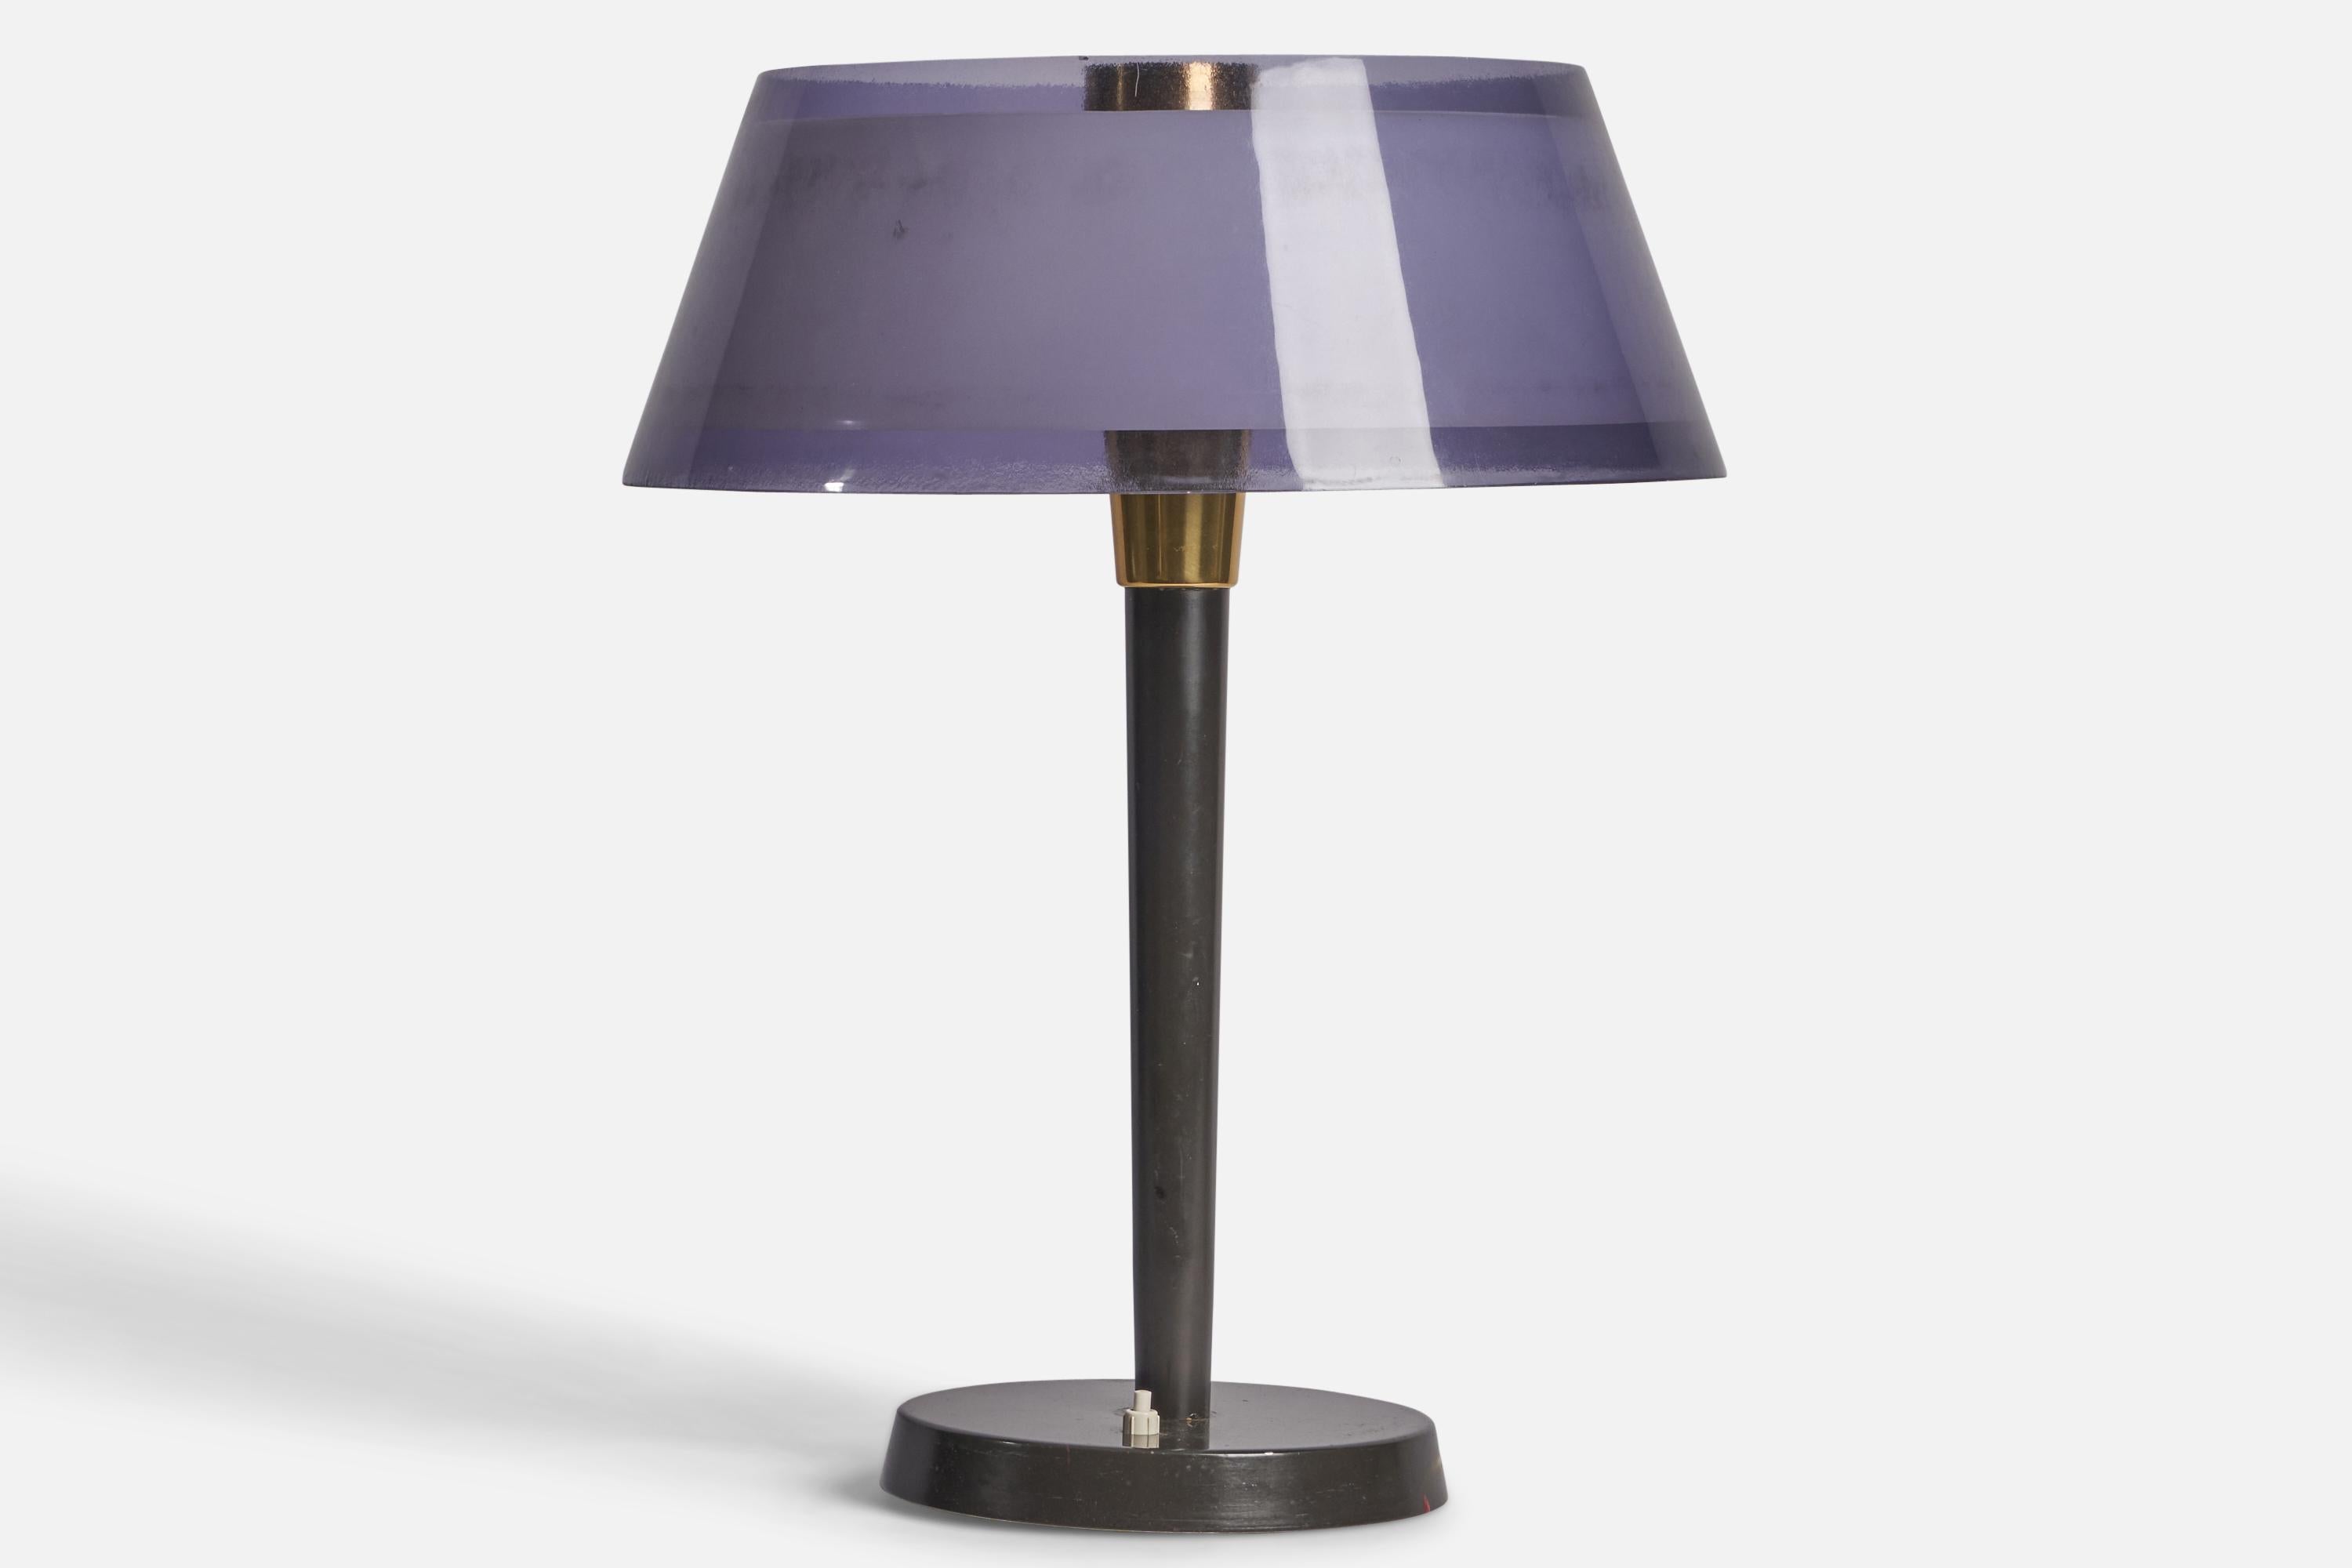 A purple and white acrylic, brass and black-lacquered metal table lamp, designed by Yki Nummi and produced by Ornö, Finland, c. 1950s.

Overall Dimensions (inches): 20.25” H x 15.5” Diameter
Bulb Specifications: E-26 Bulb
Number of Sockets: 1
All